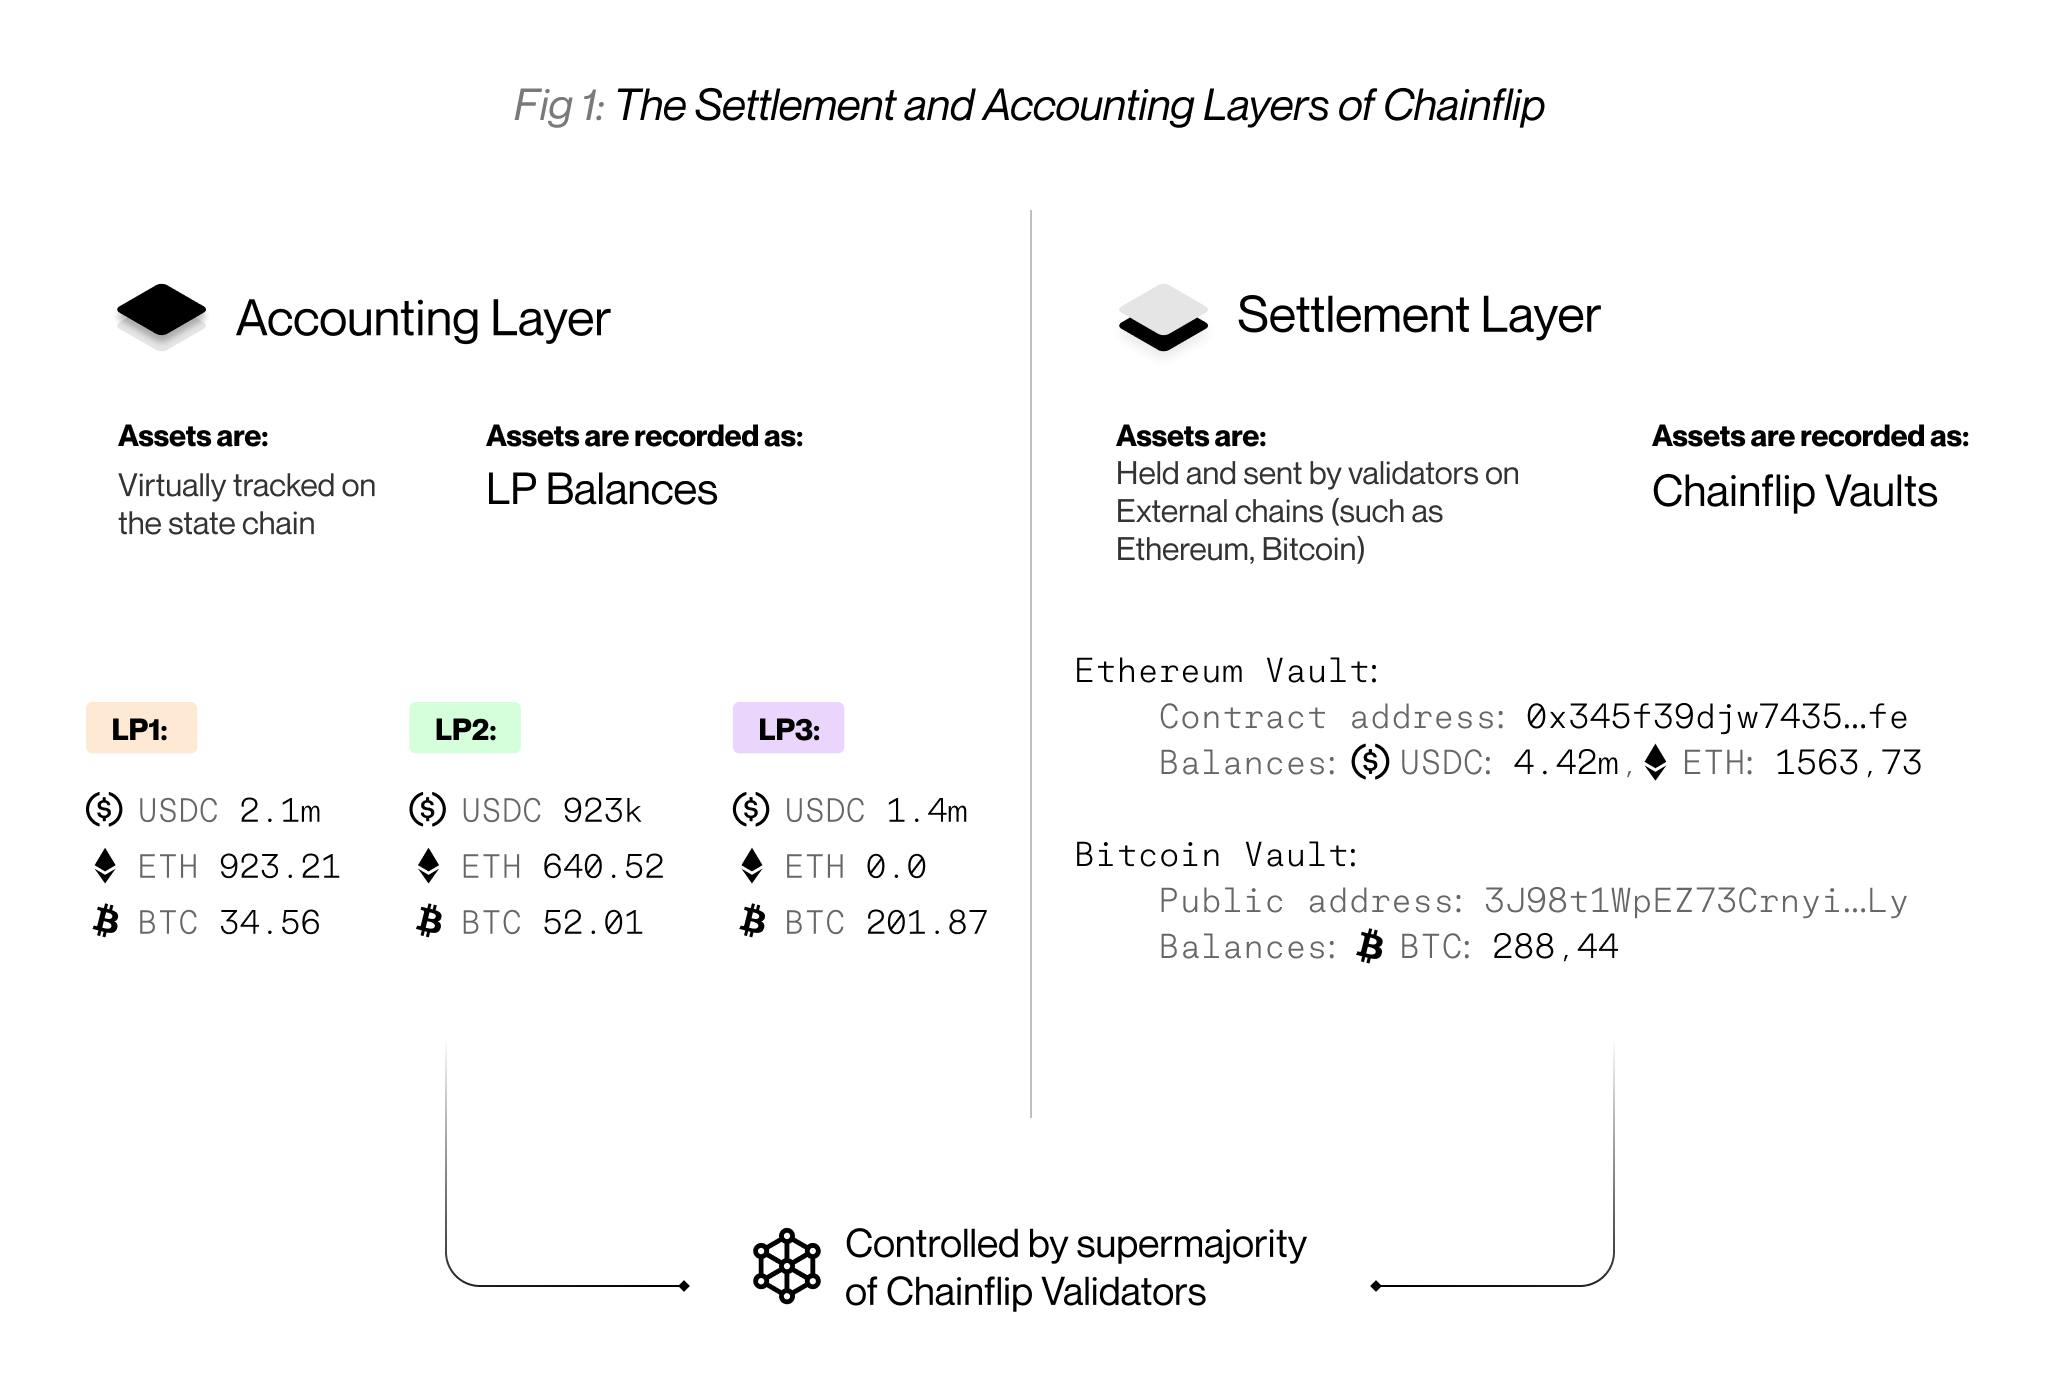 Settlement and Accounting Layers